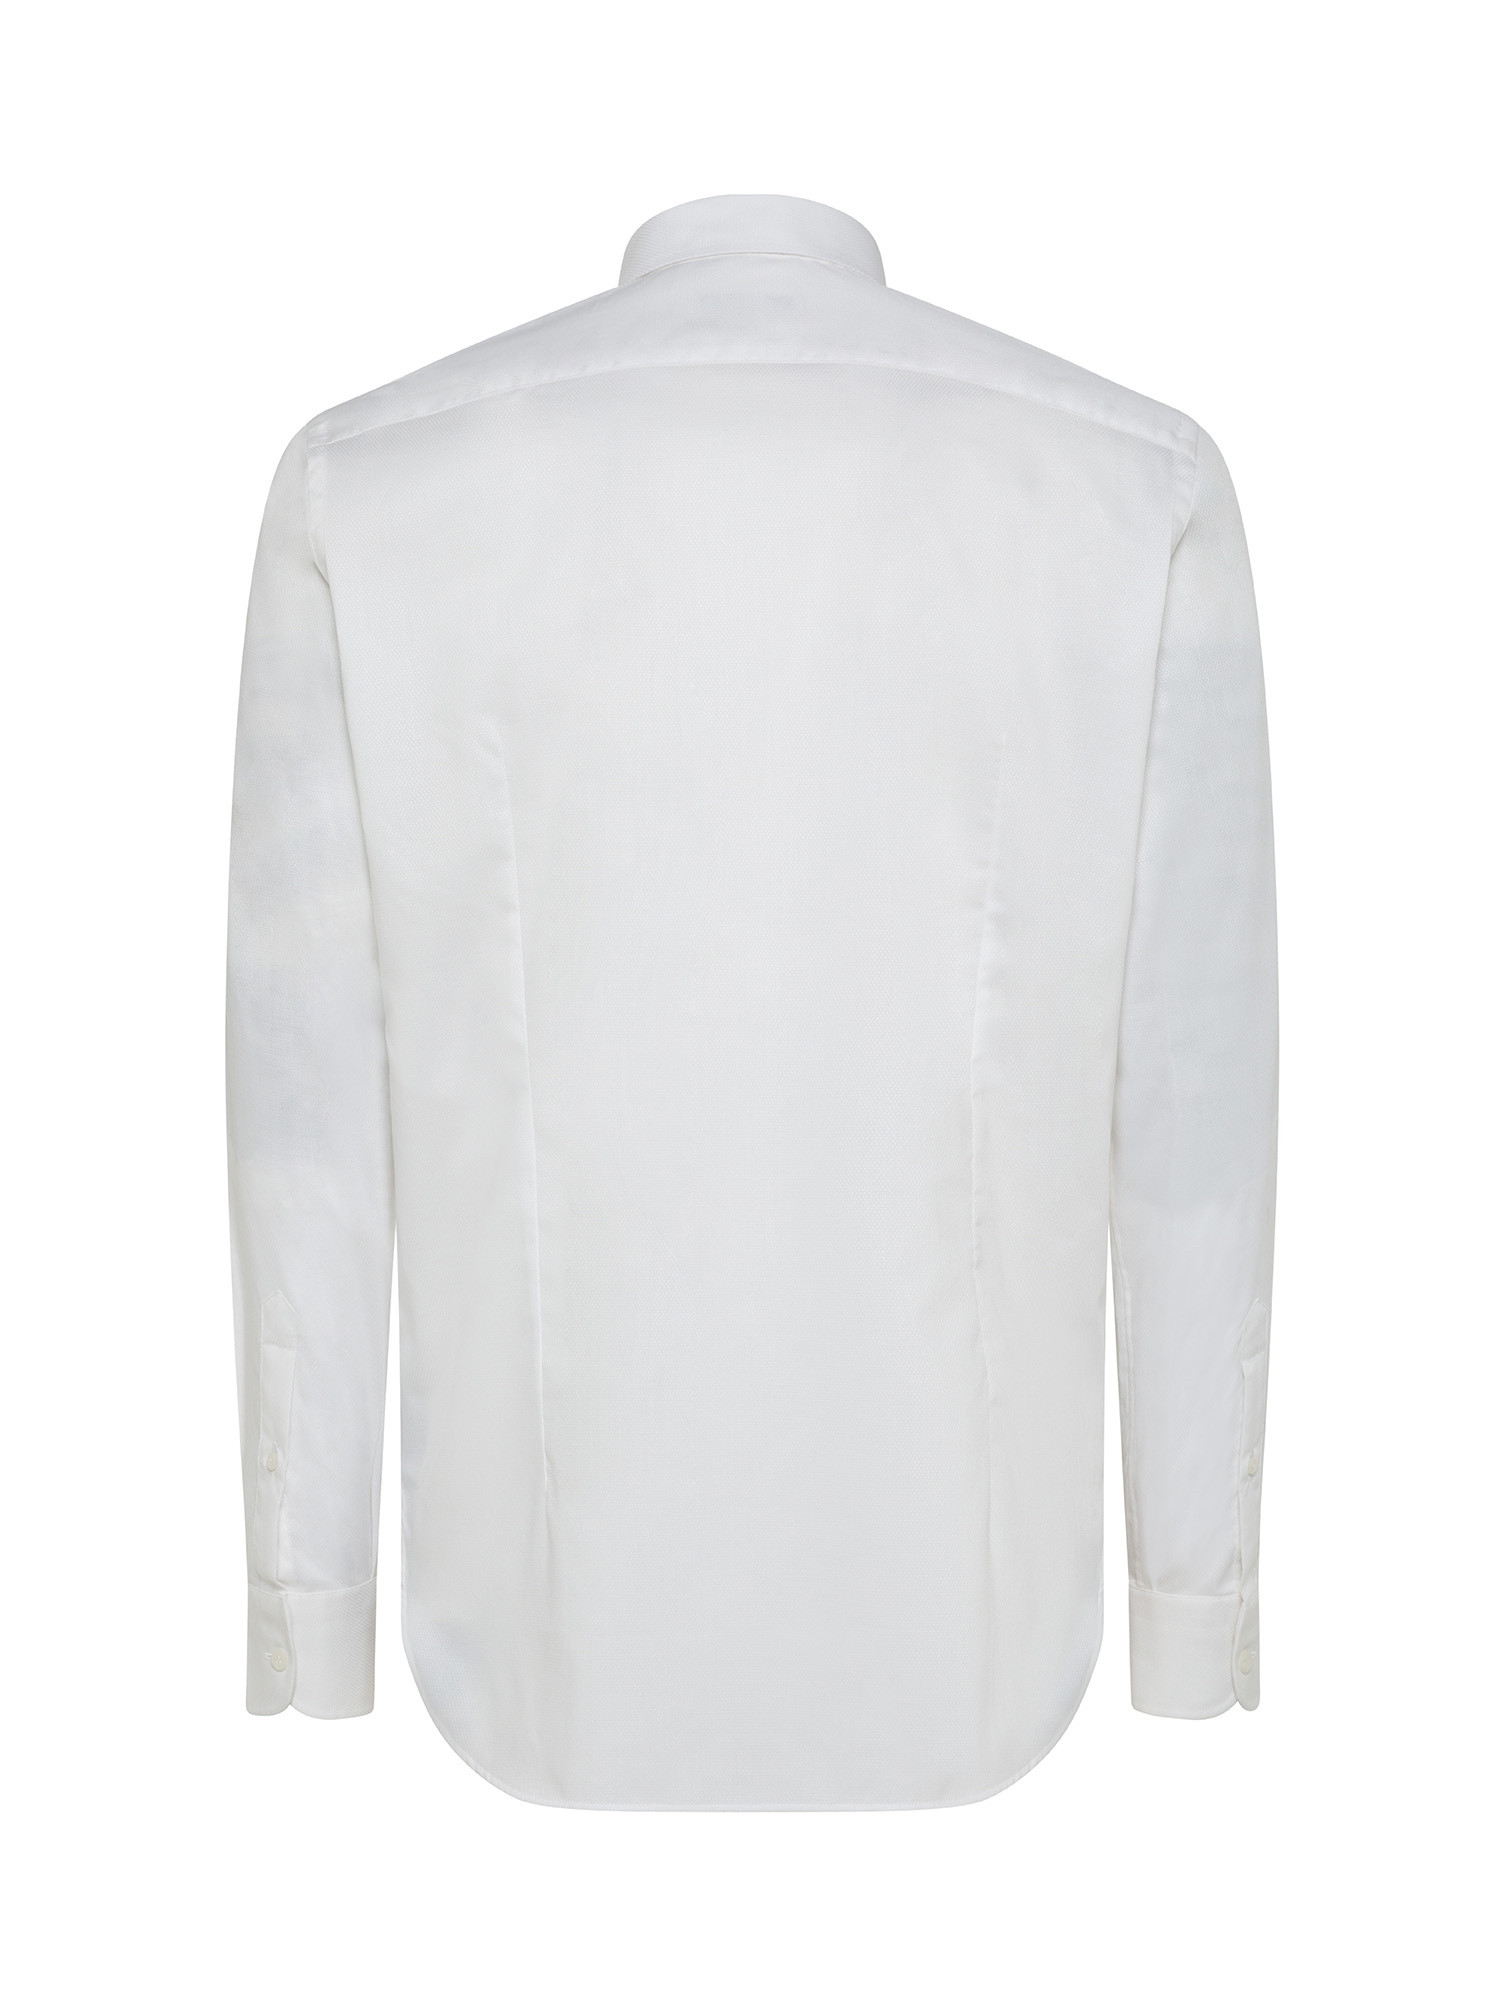 Luca D'Altieri - Slim fit shirt in stretch cotton, White, large image number 1